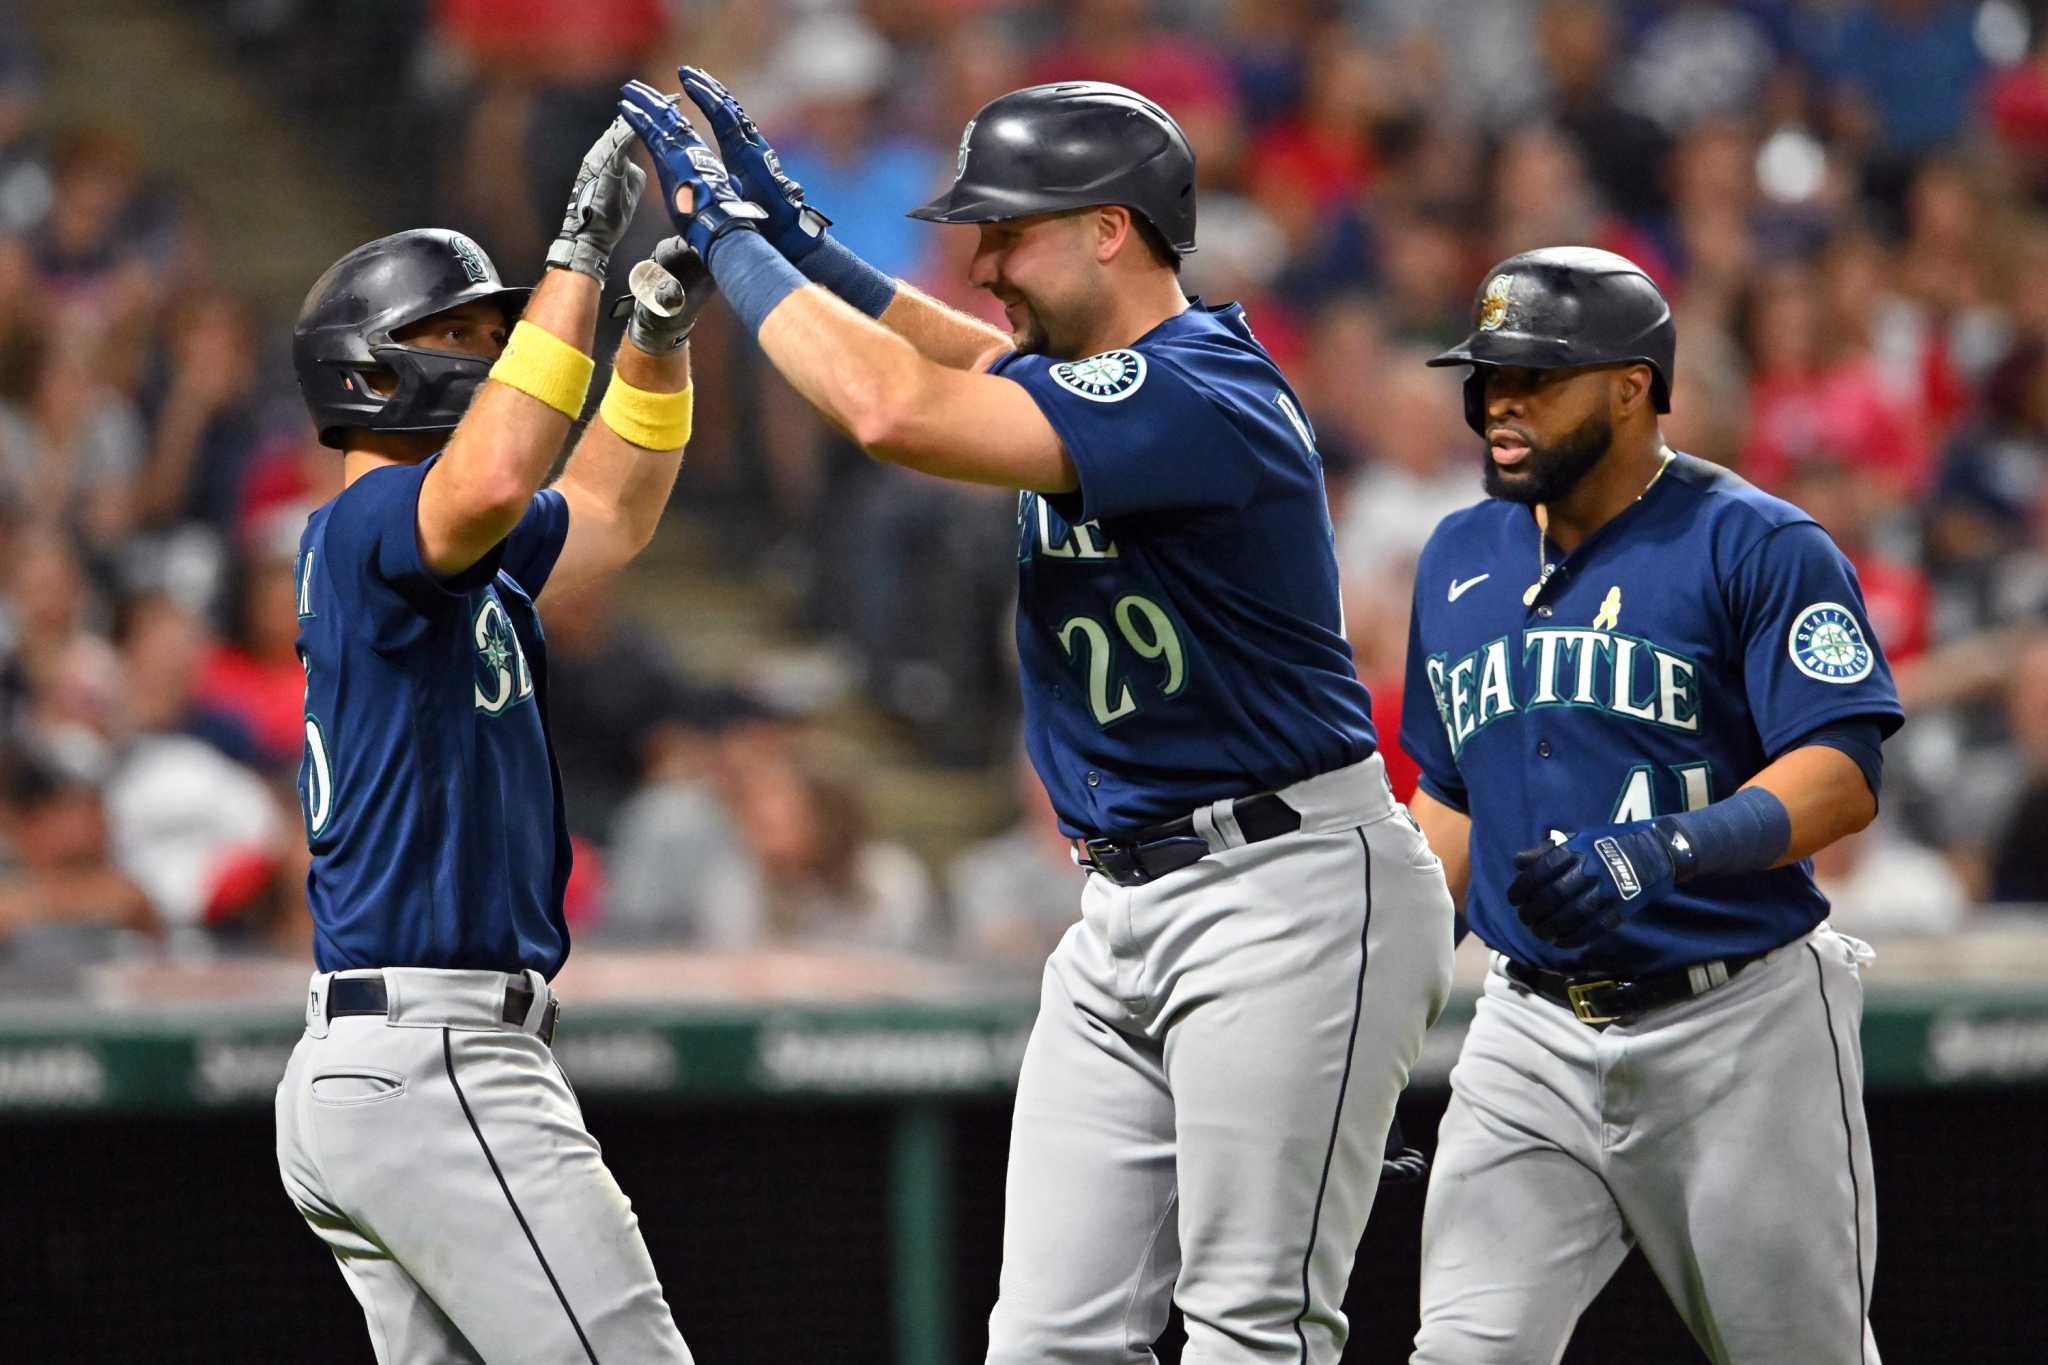 Adam Frazier of the Seattle Mariners poses for a photo during the